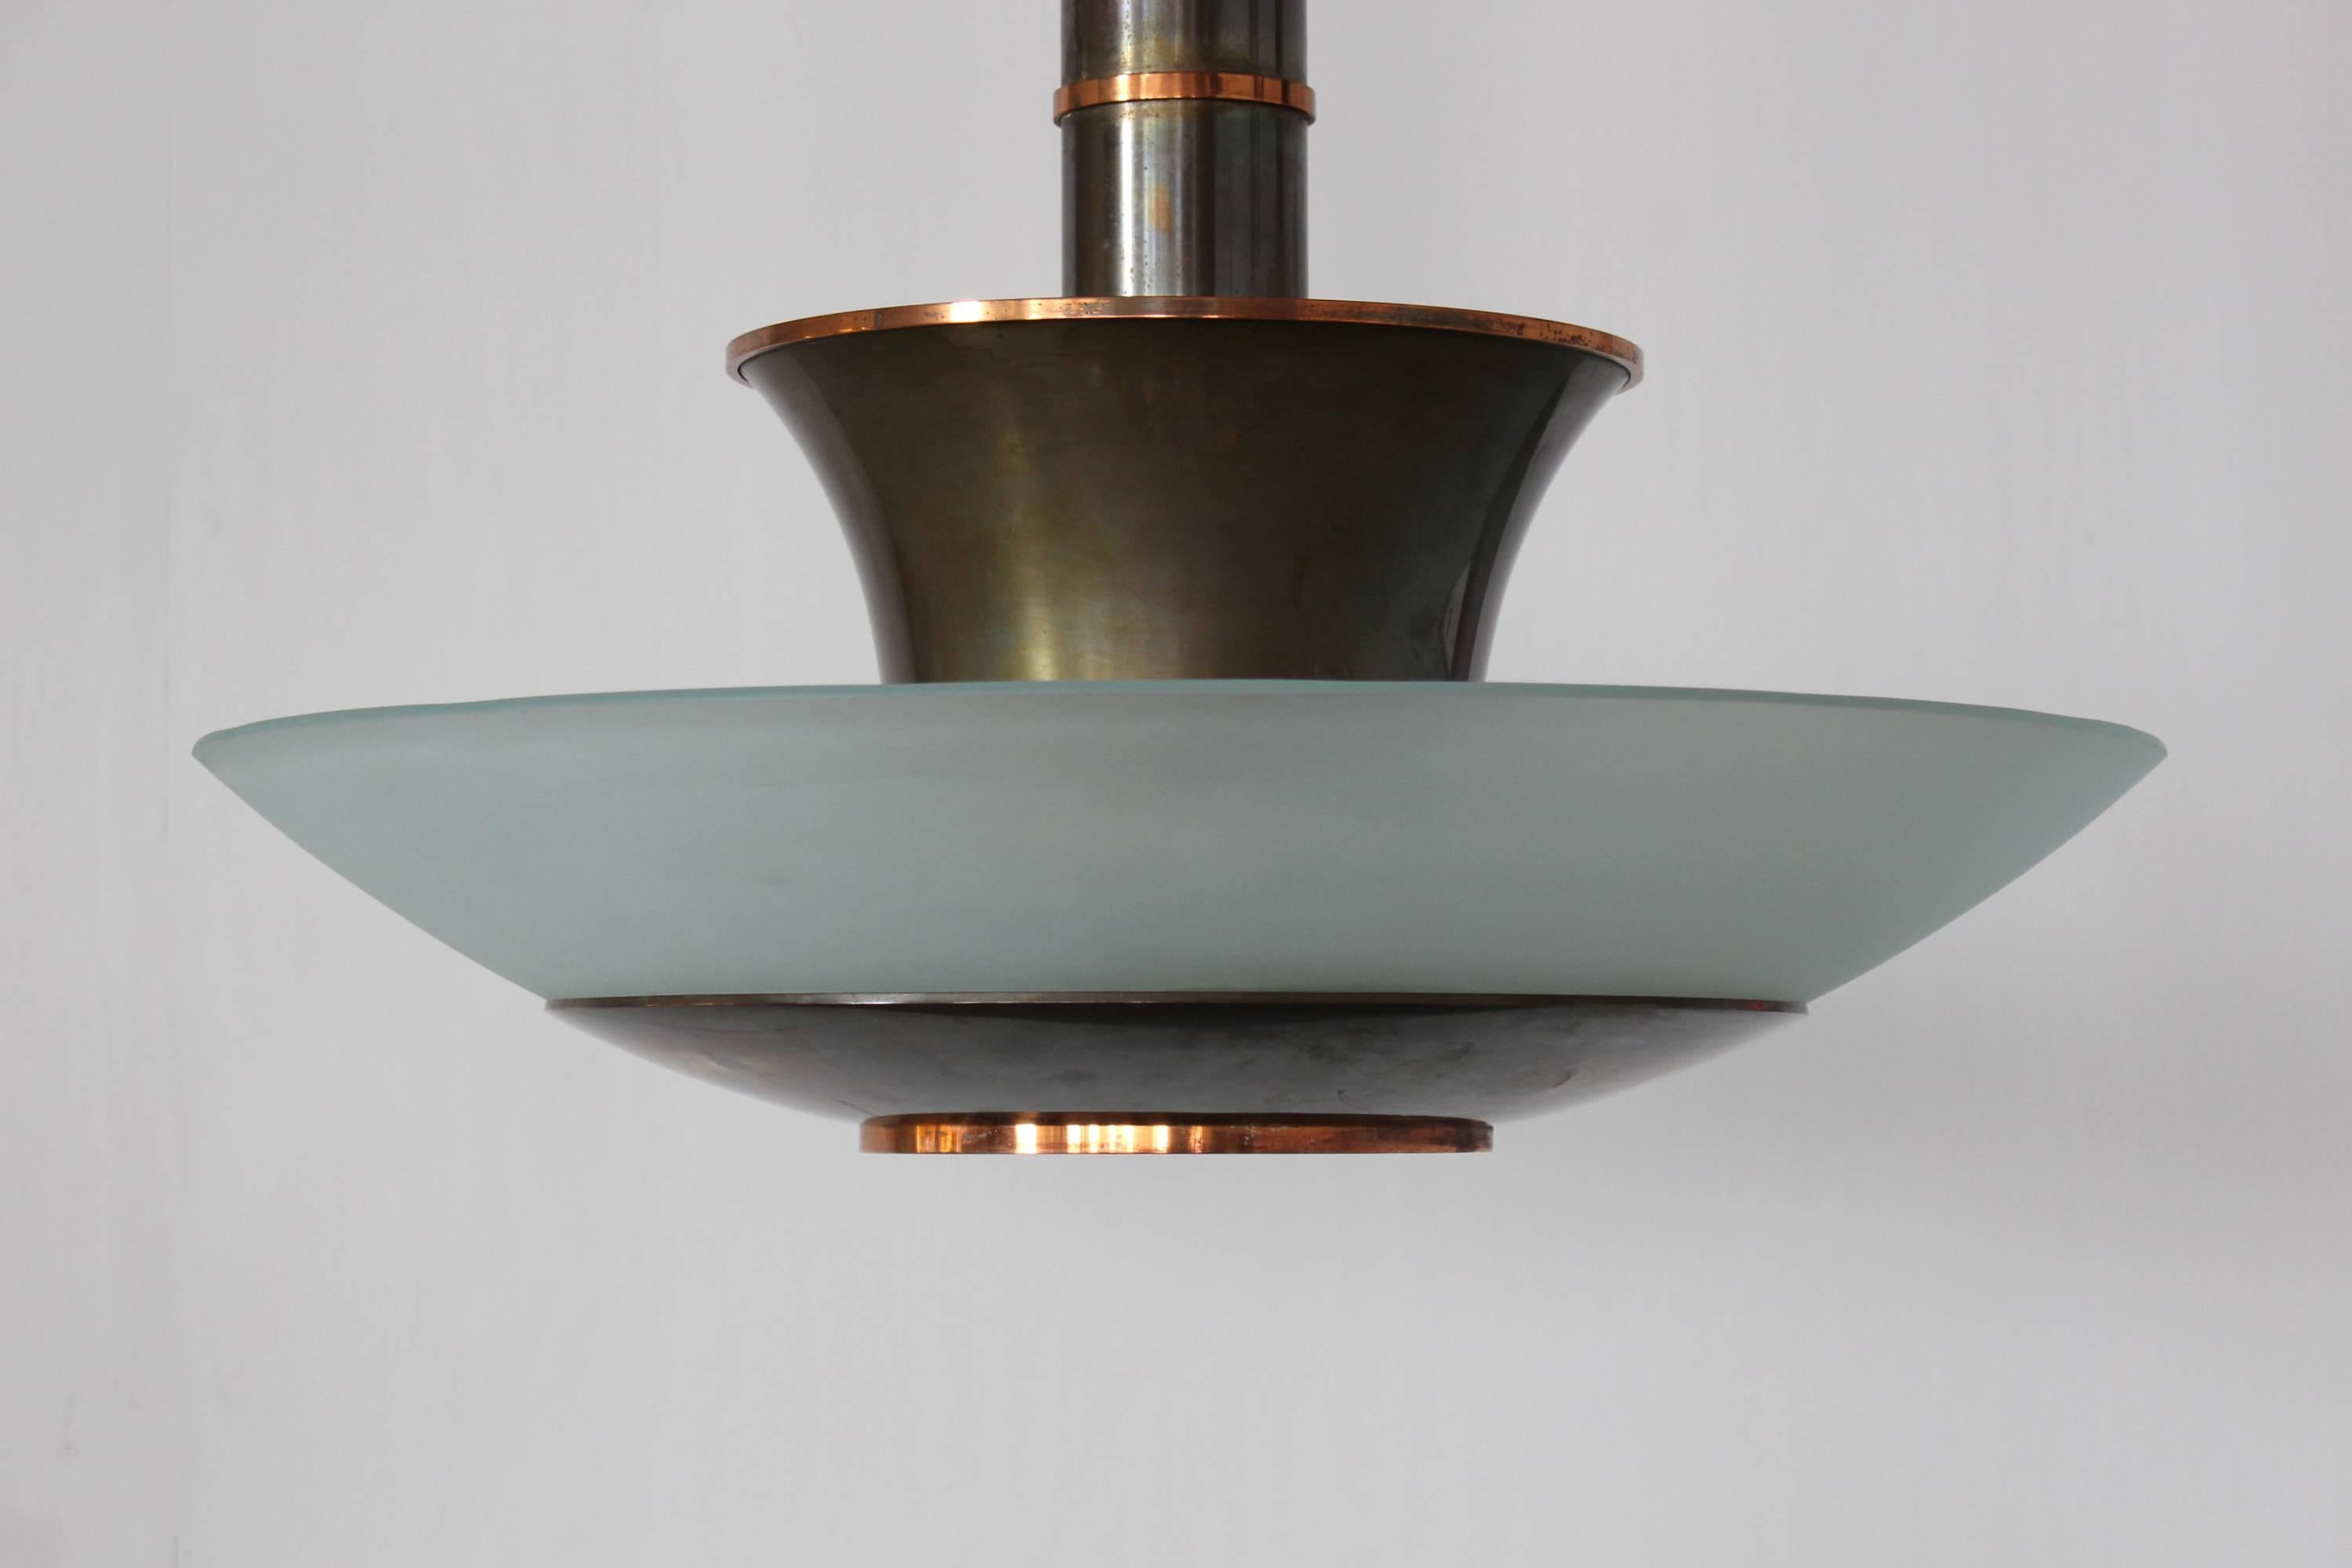 Fine French Art Deco Bronze and Glass Chandelier by Genet et Michon In Good Condition For Sale In Long Island City, NY